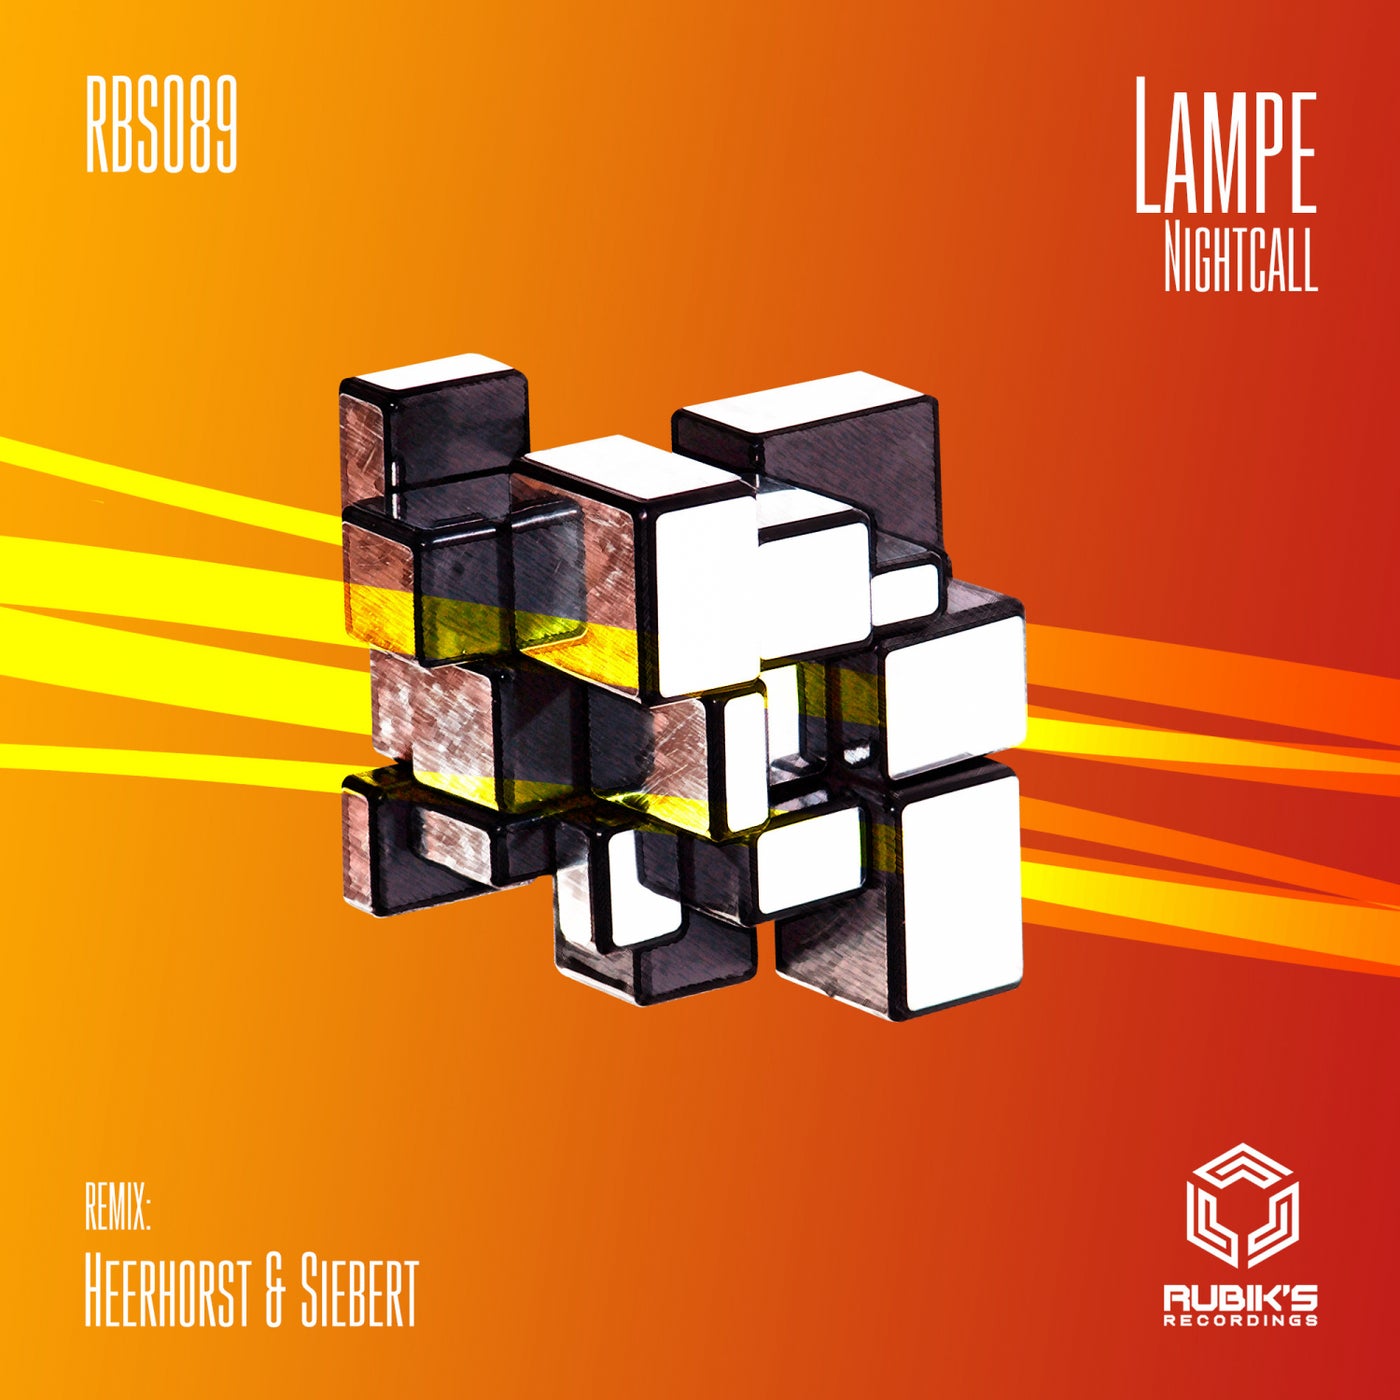 image cover: Lampe - Nightcall / RBS089